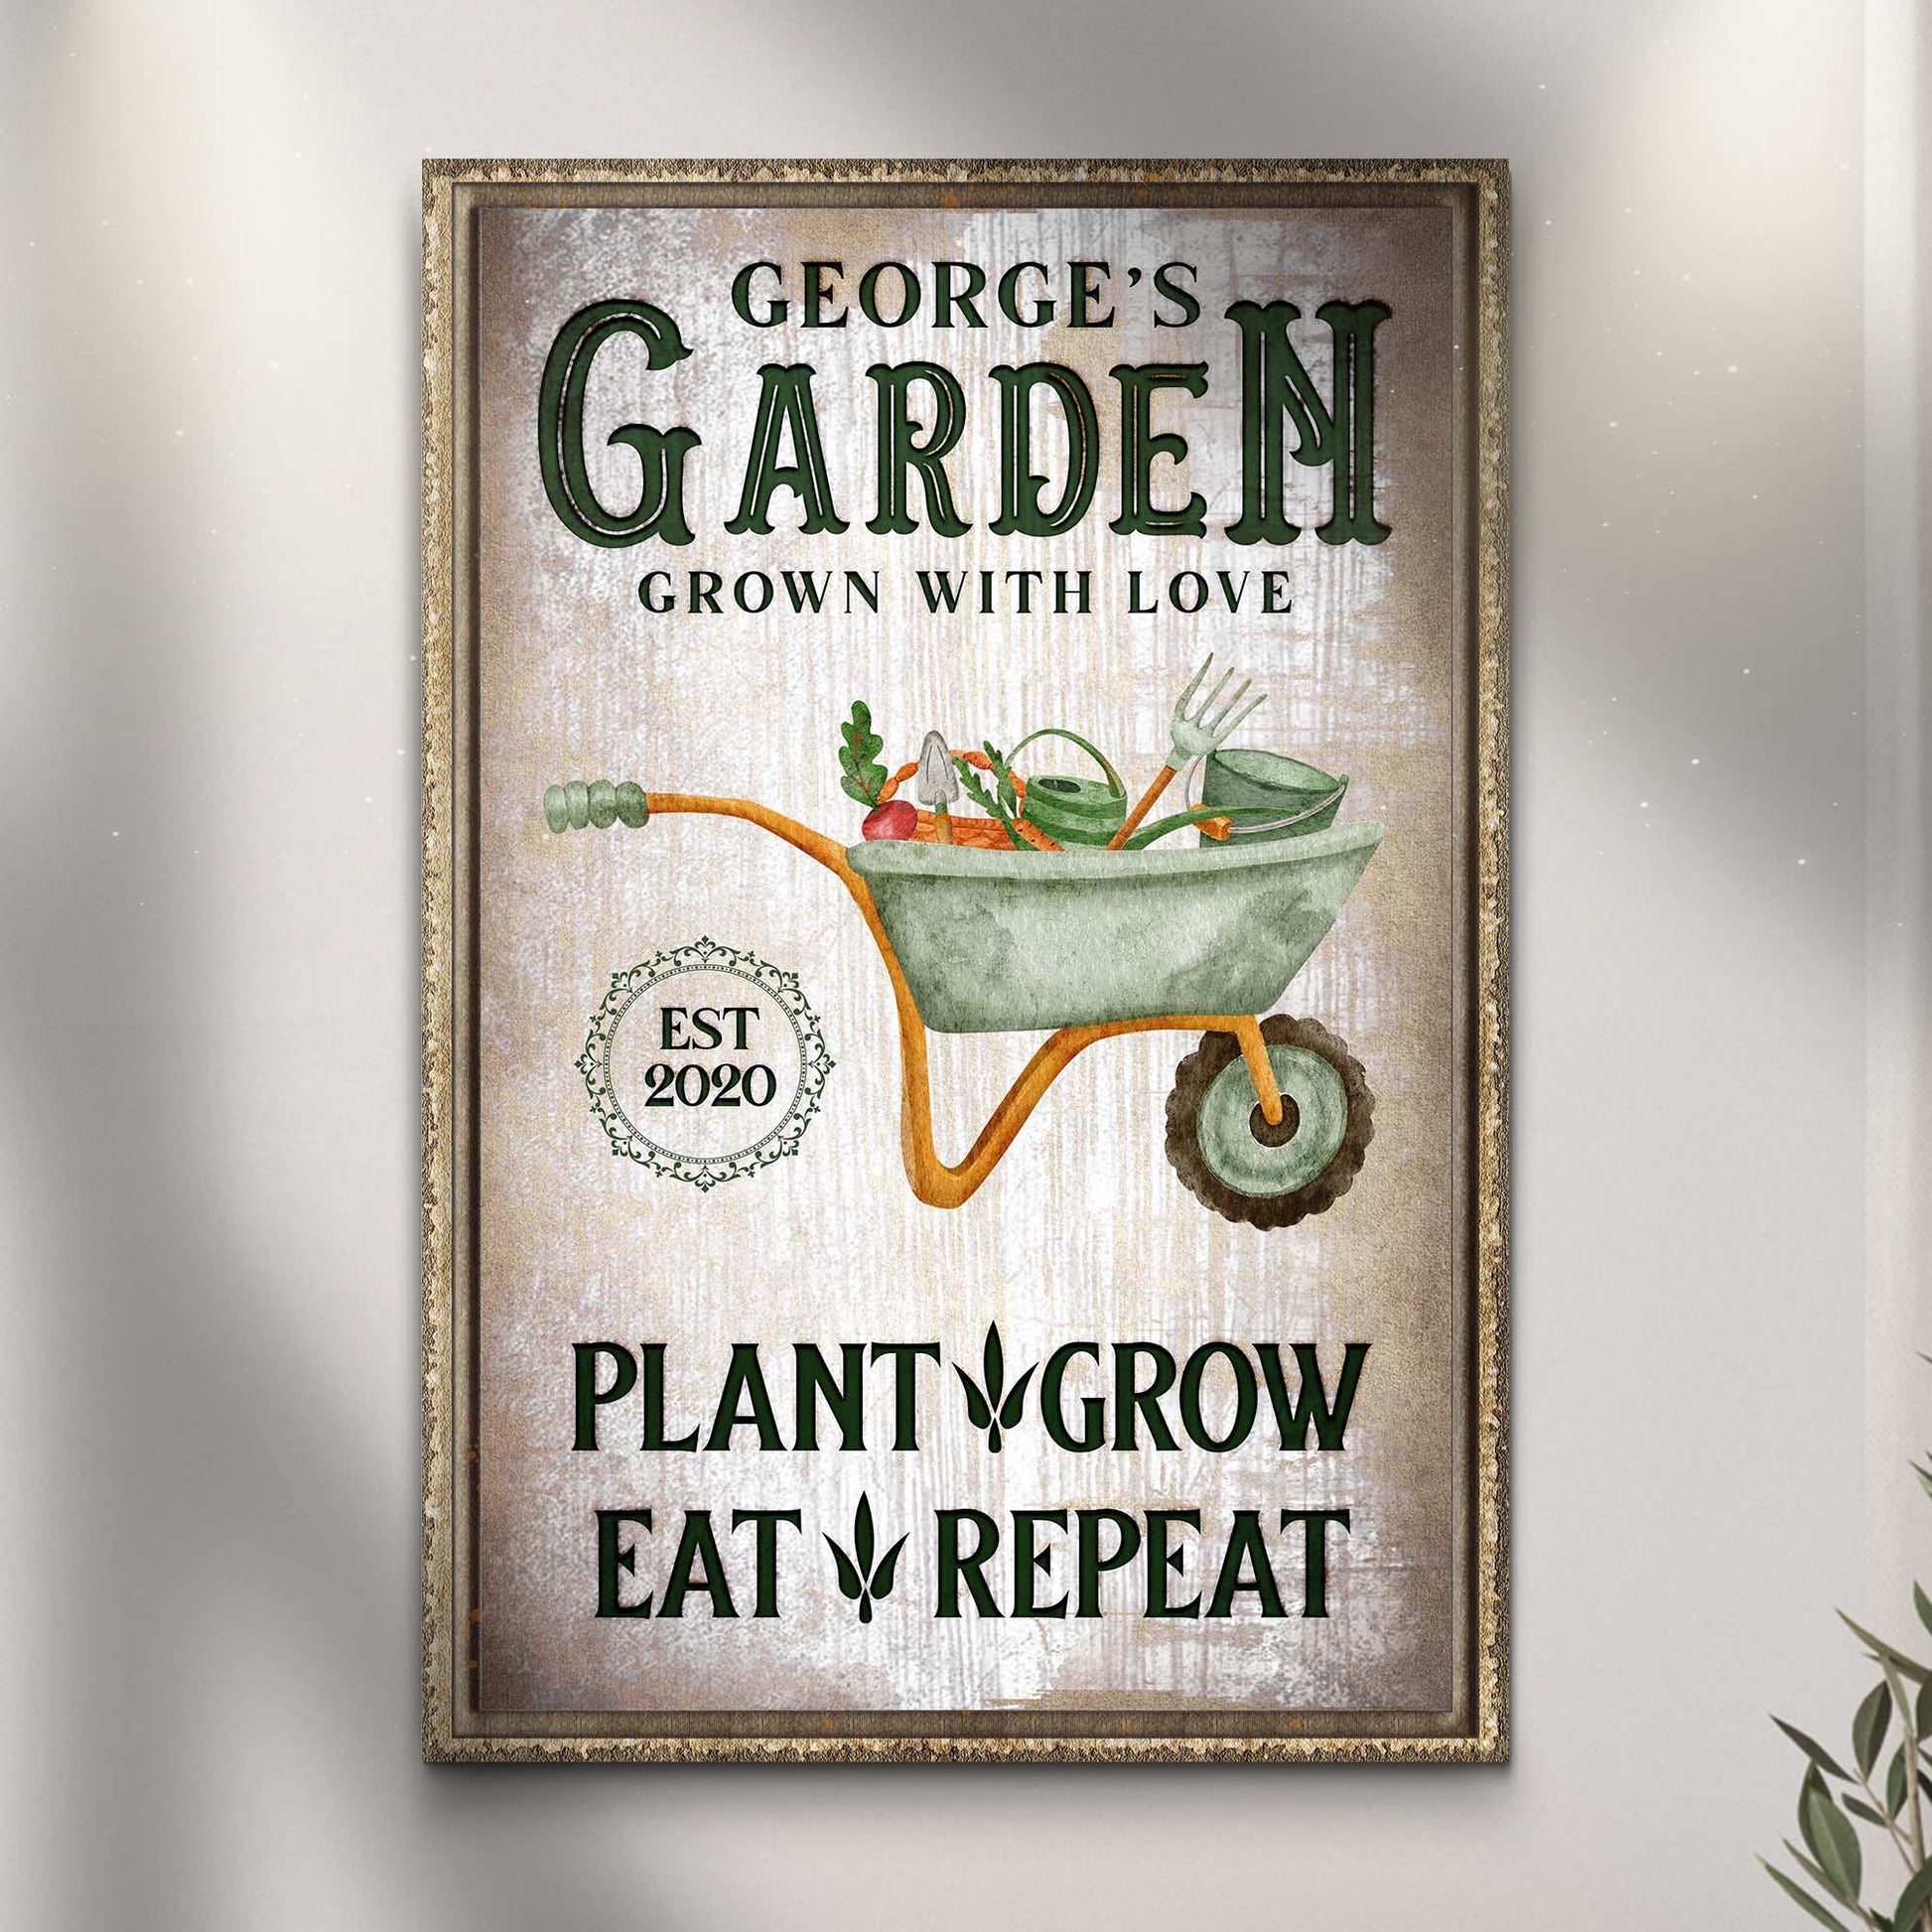 Grown With Love Garden Sign III - Image by Tailored Canvases